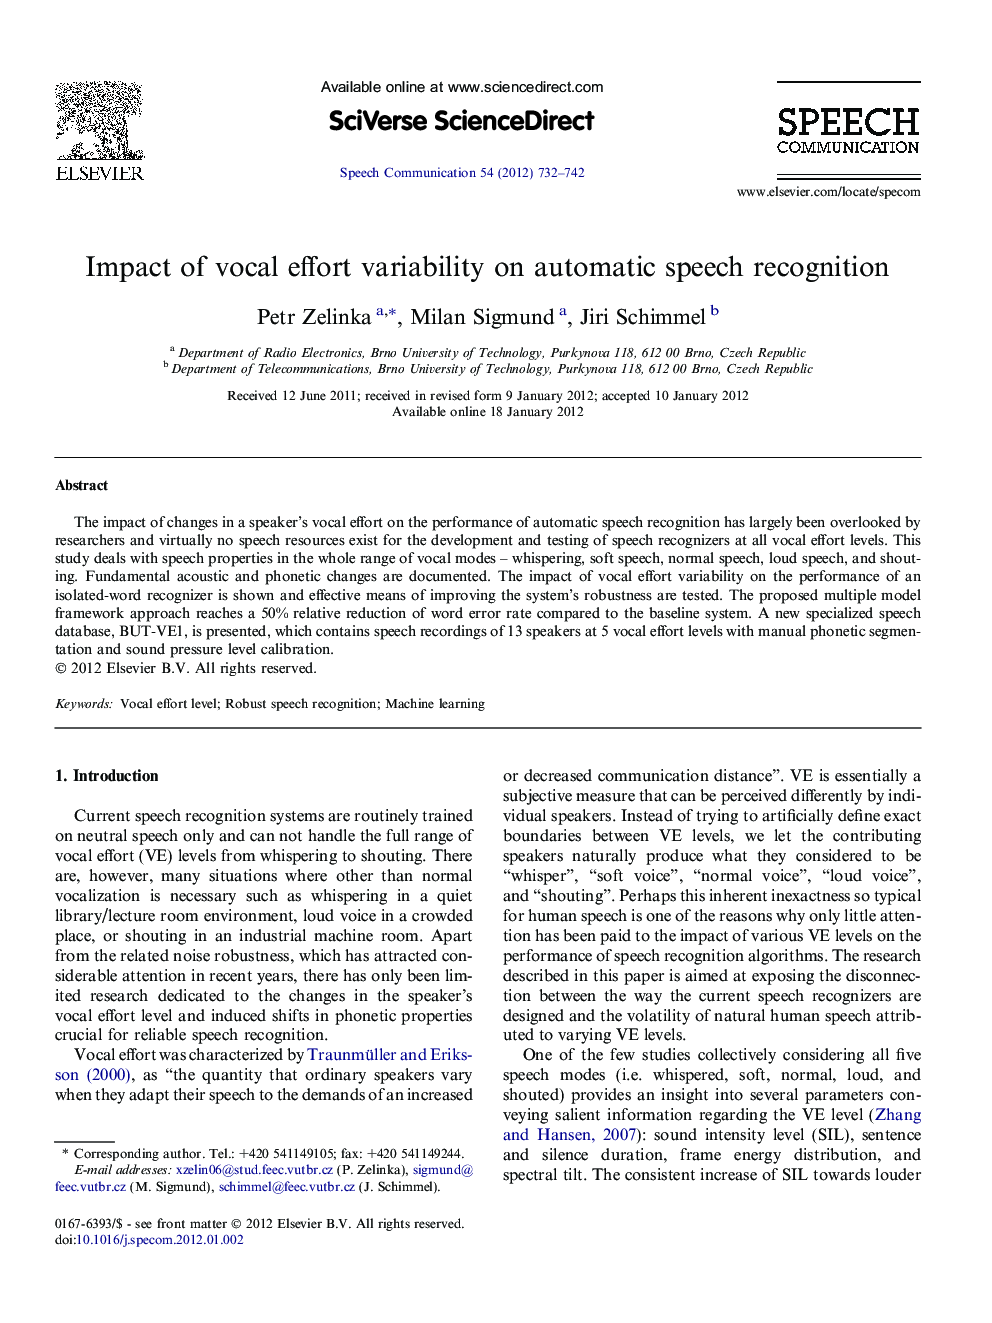 Impact of vocal effort variability on automatic speech recognition